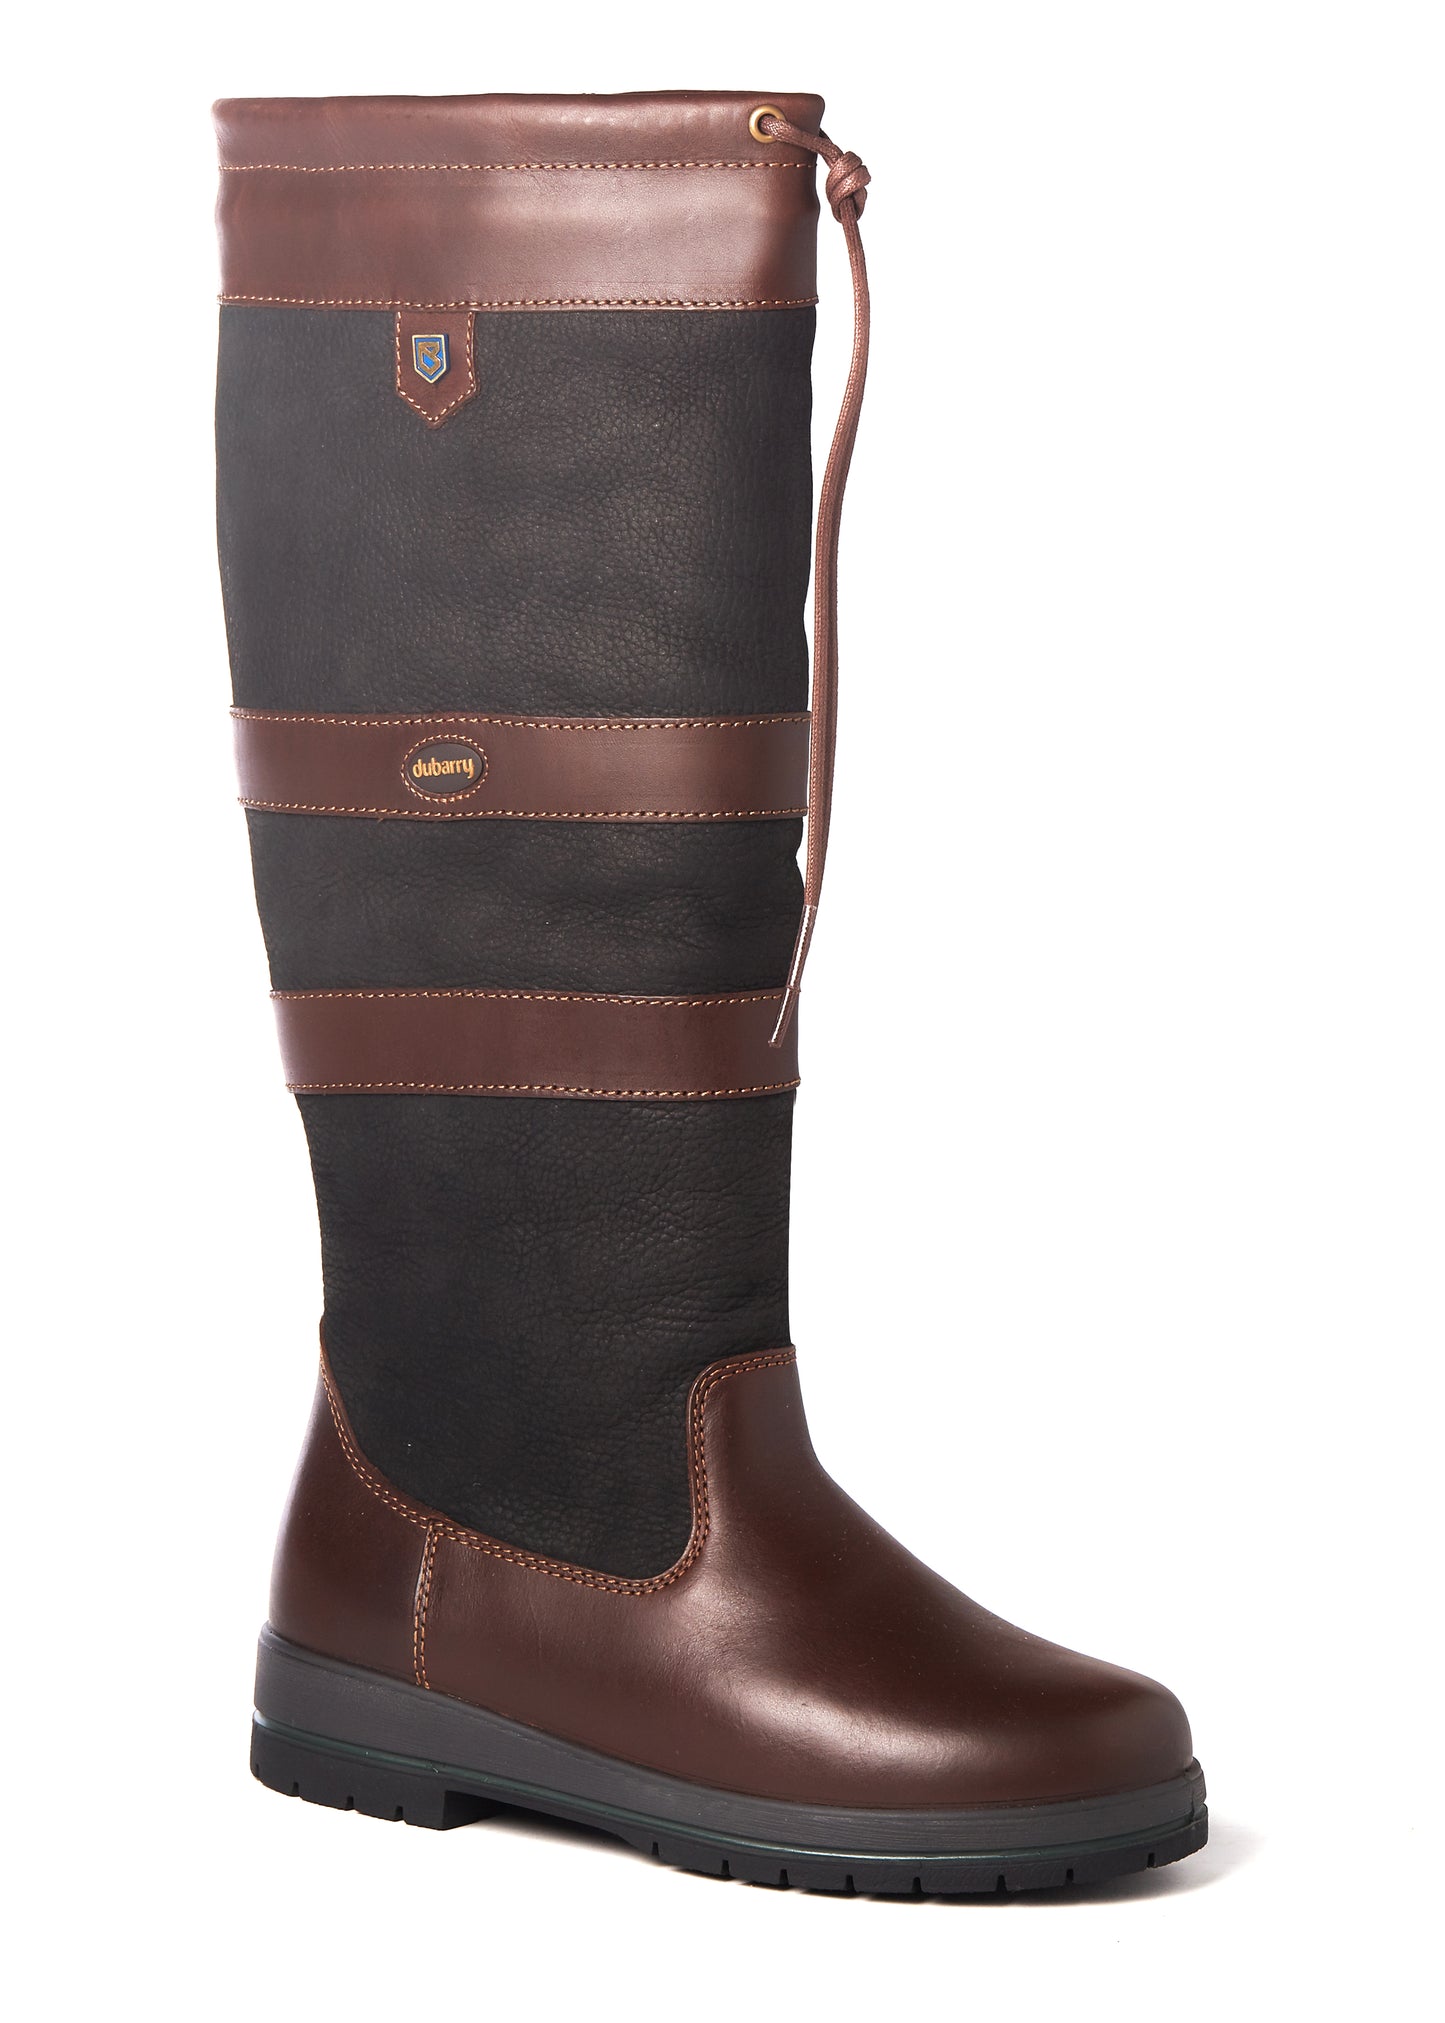 Galway Boots Ex Fit - Black & Brown